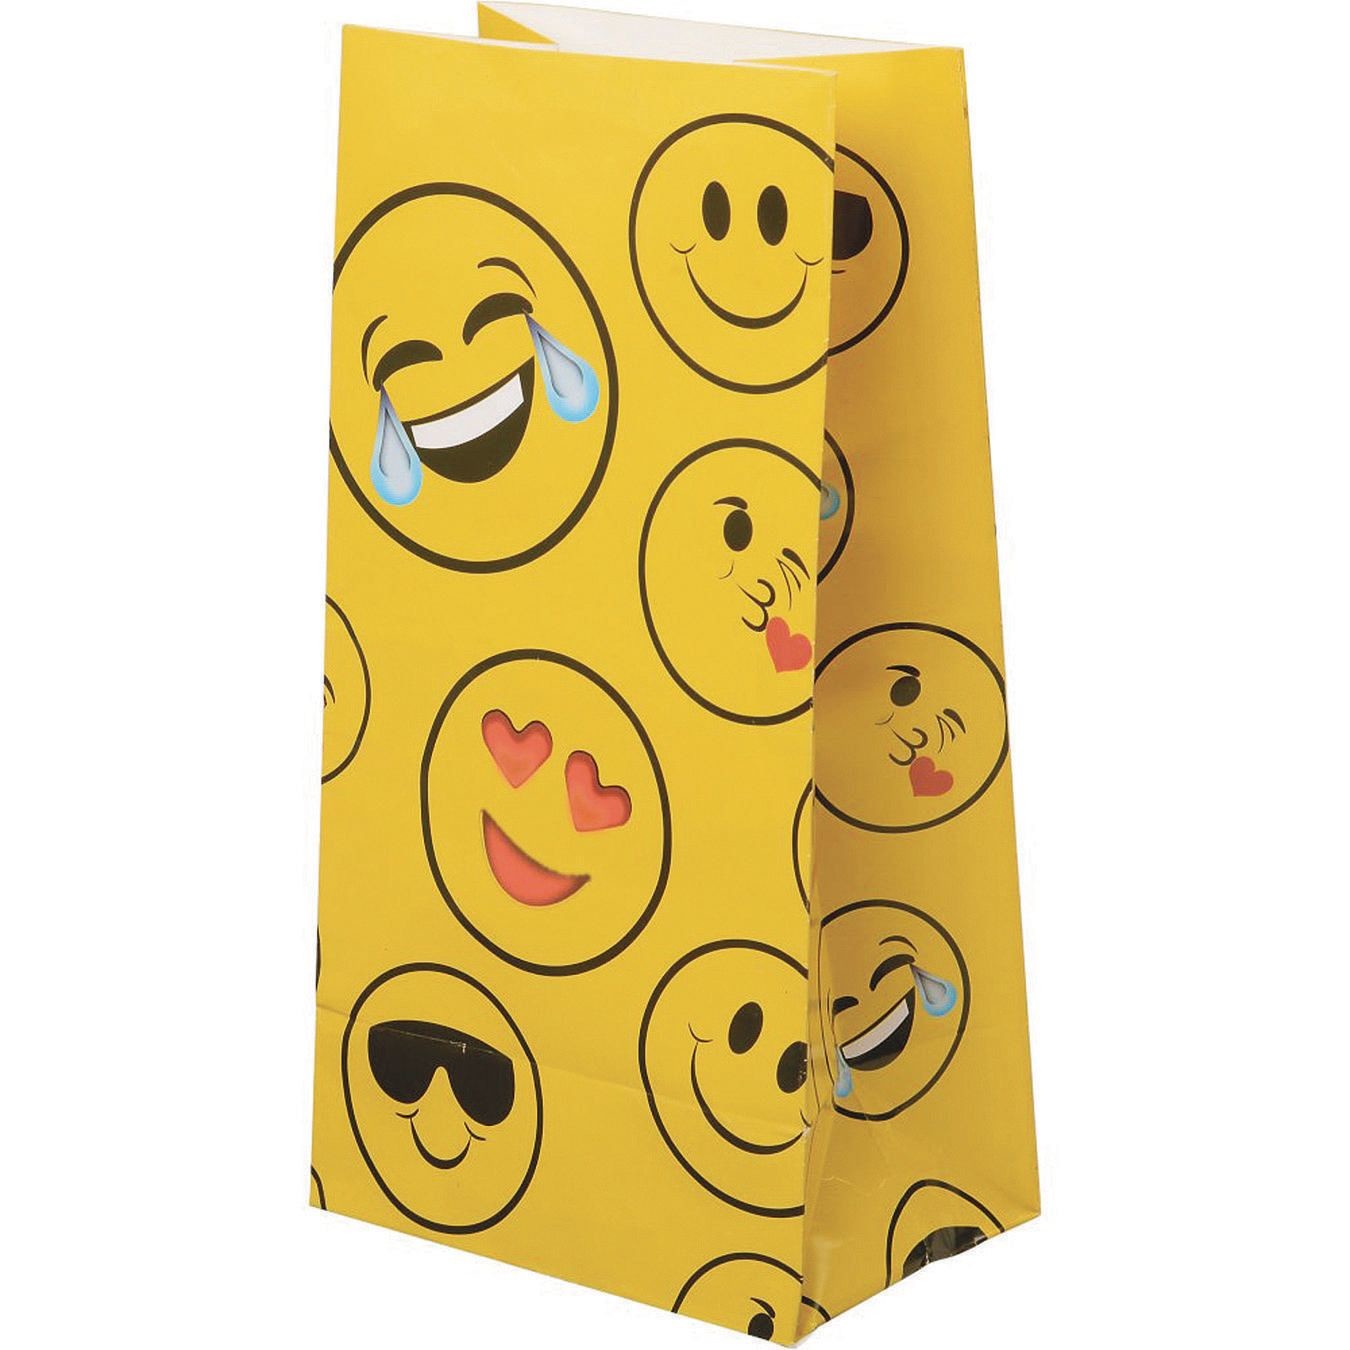 12 EMOJI EMOTICON NECKLACES BRACELETS PARTY FAVORS GOODY BAGS TREAT BOXES POOL 